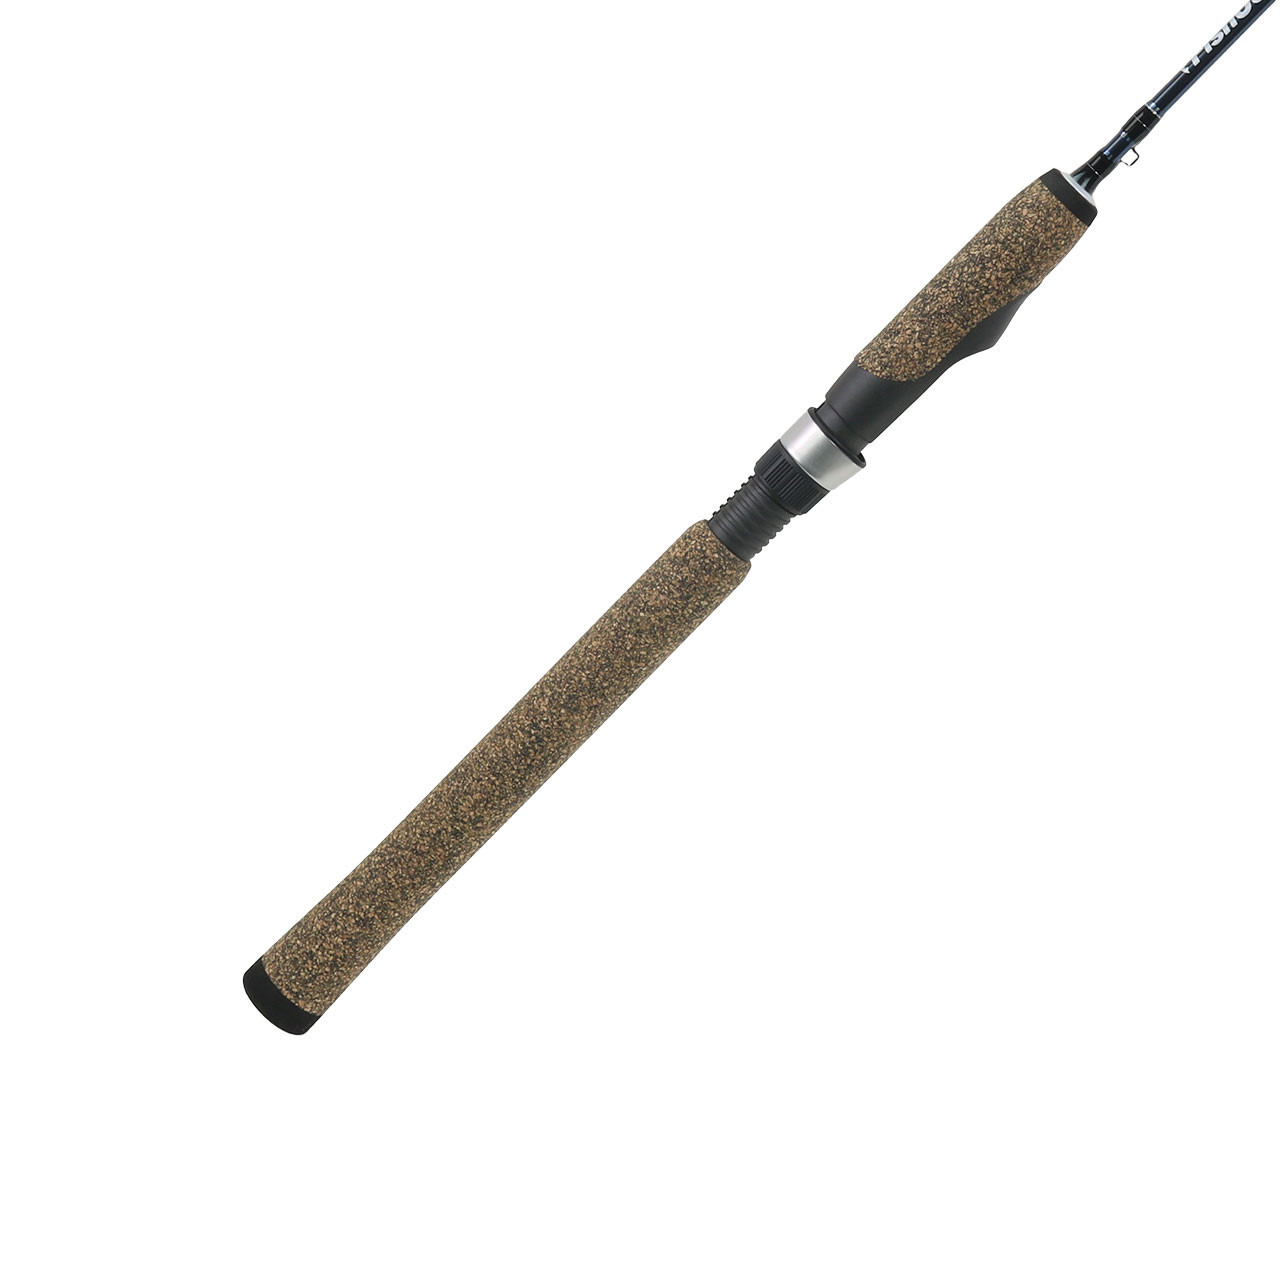 FORTIS 5' Ultra Light Action 2 Piece Spinning Rod and 2000